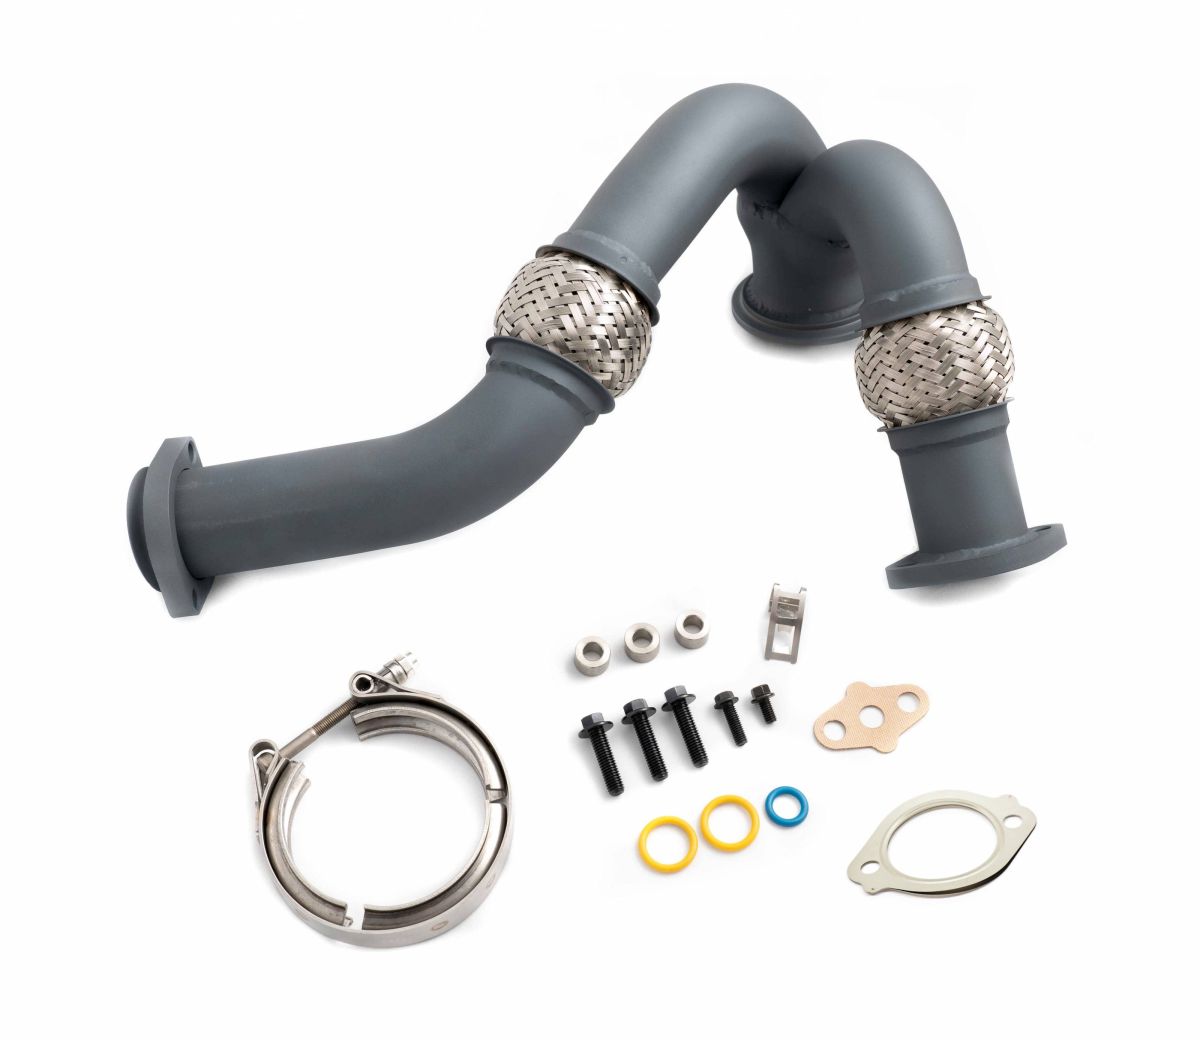 Rudy's Performance Parts - Rudy's High Temp Ceramic Coated Heavy Duty 304 SS Up Pipe Kit & Turbo V-Band Clamp For 03-07 6.0 Powerstroke